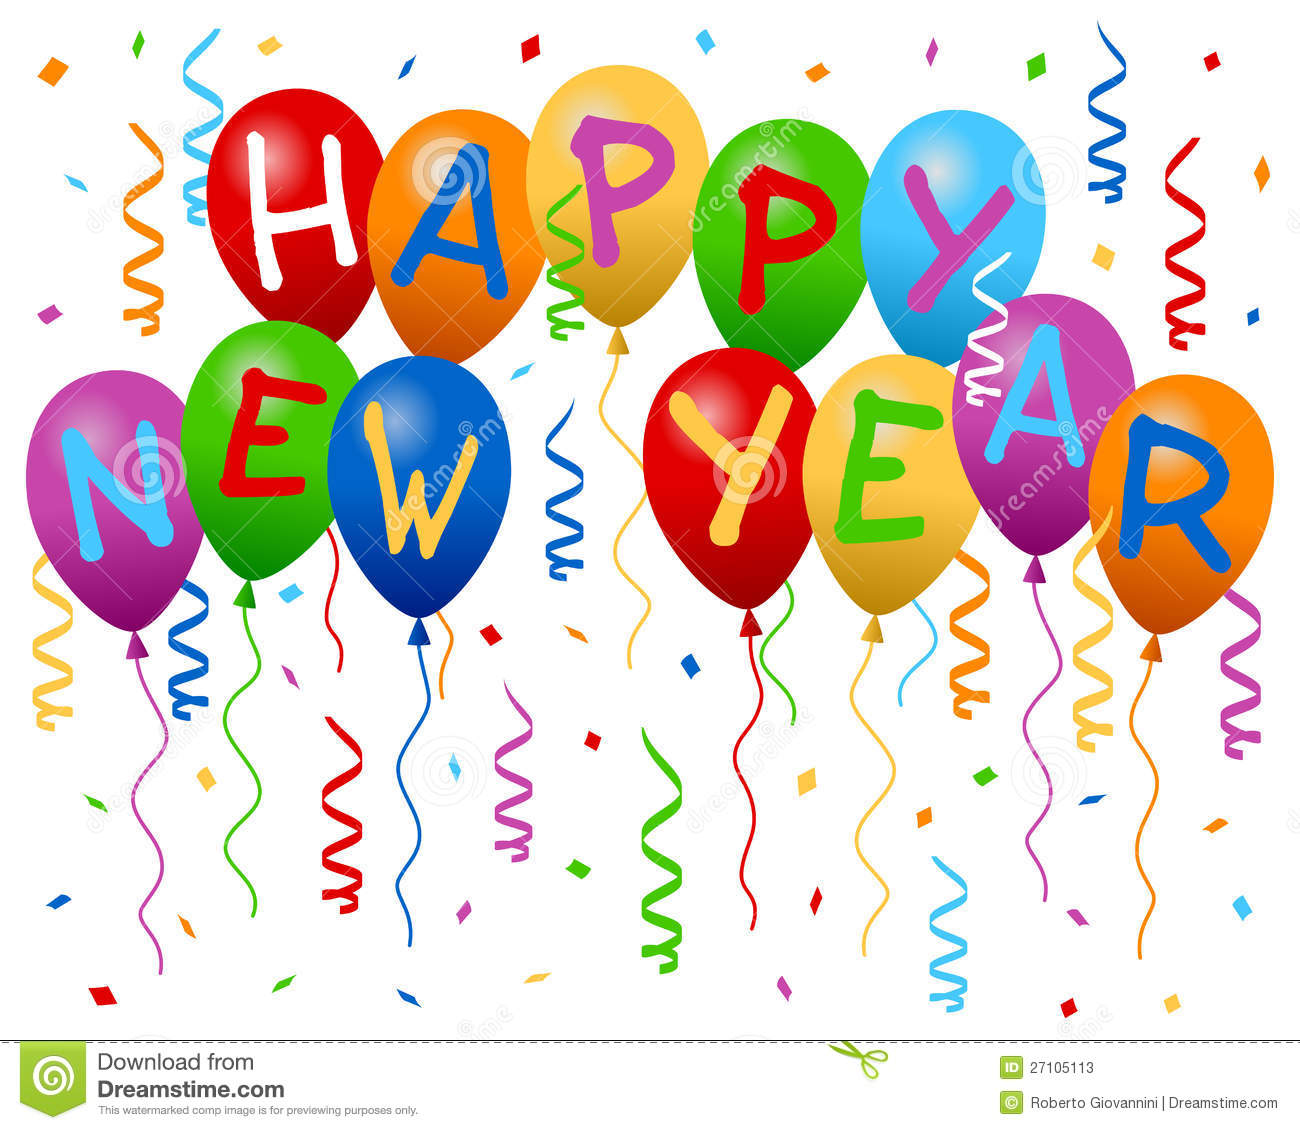 Happy new year clipart free c